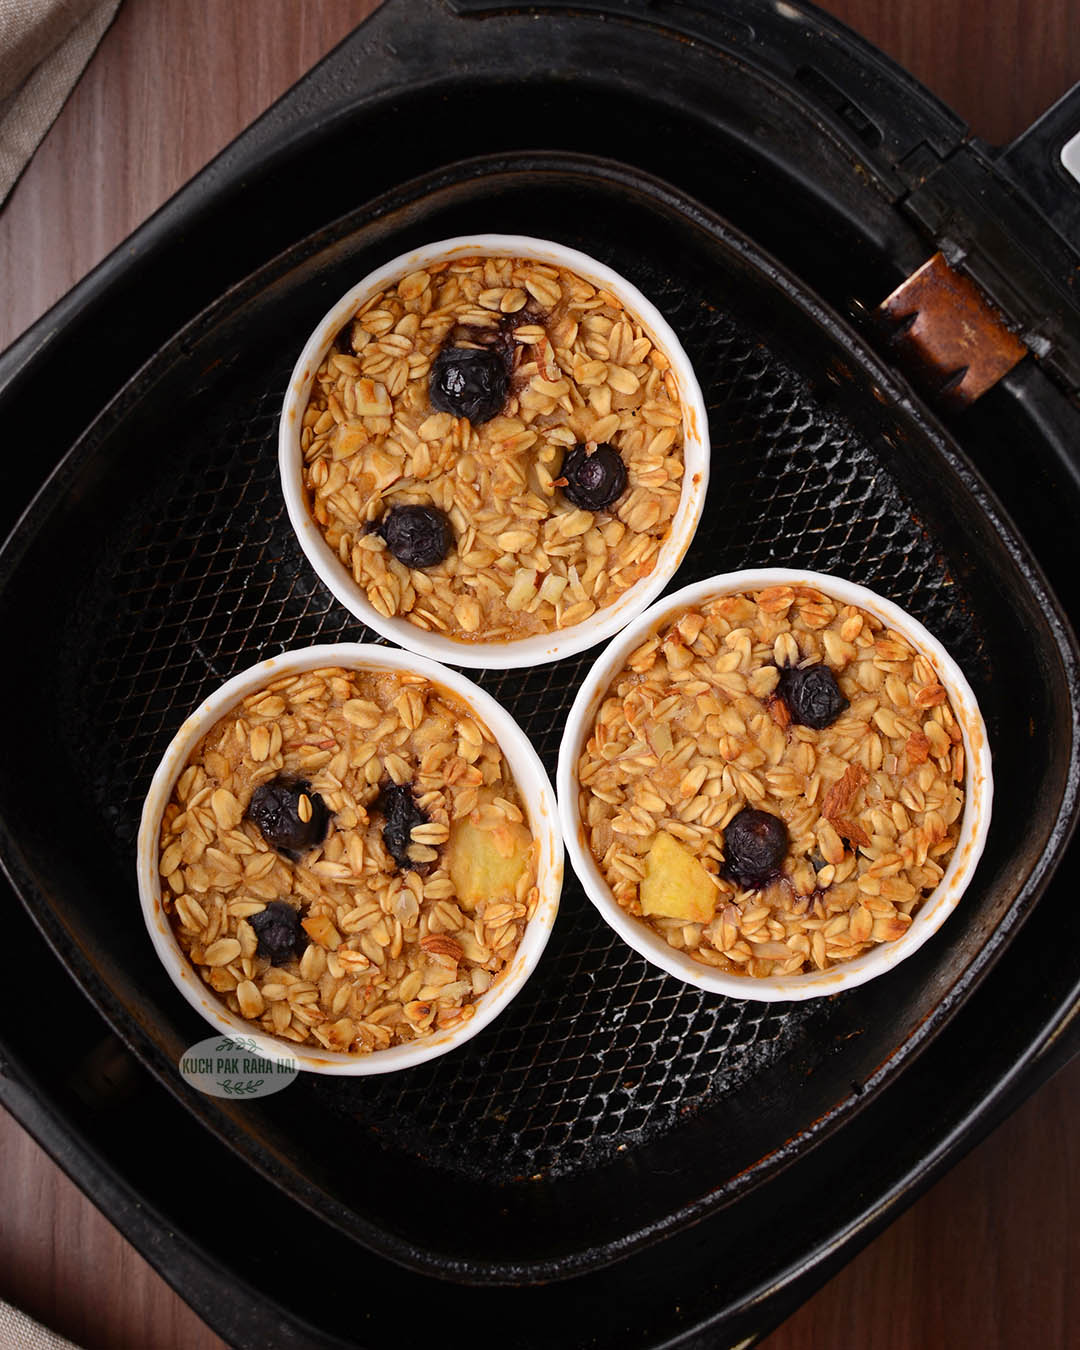 Baked oatmeal made in air fryer.